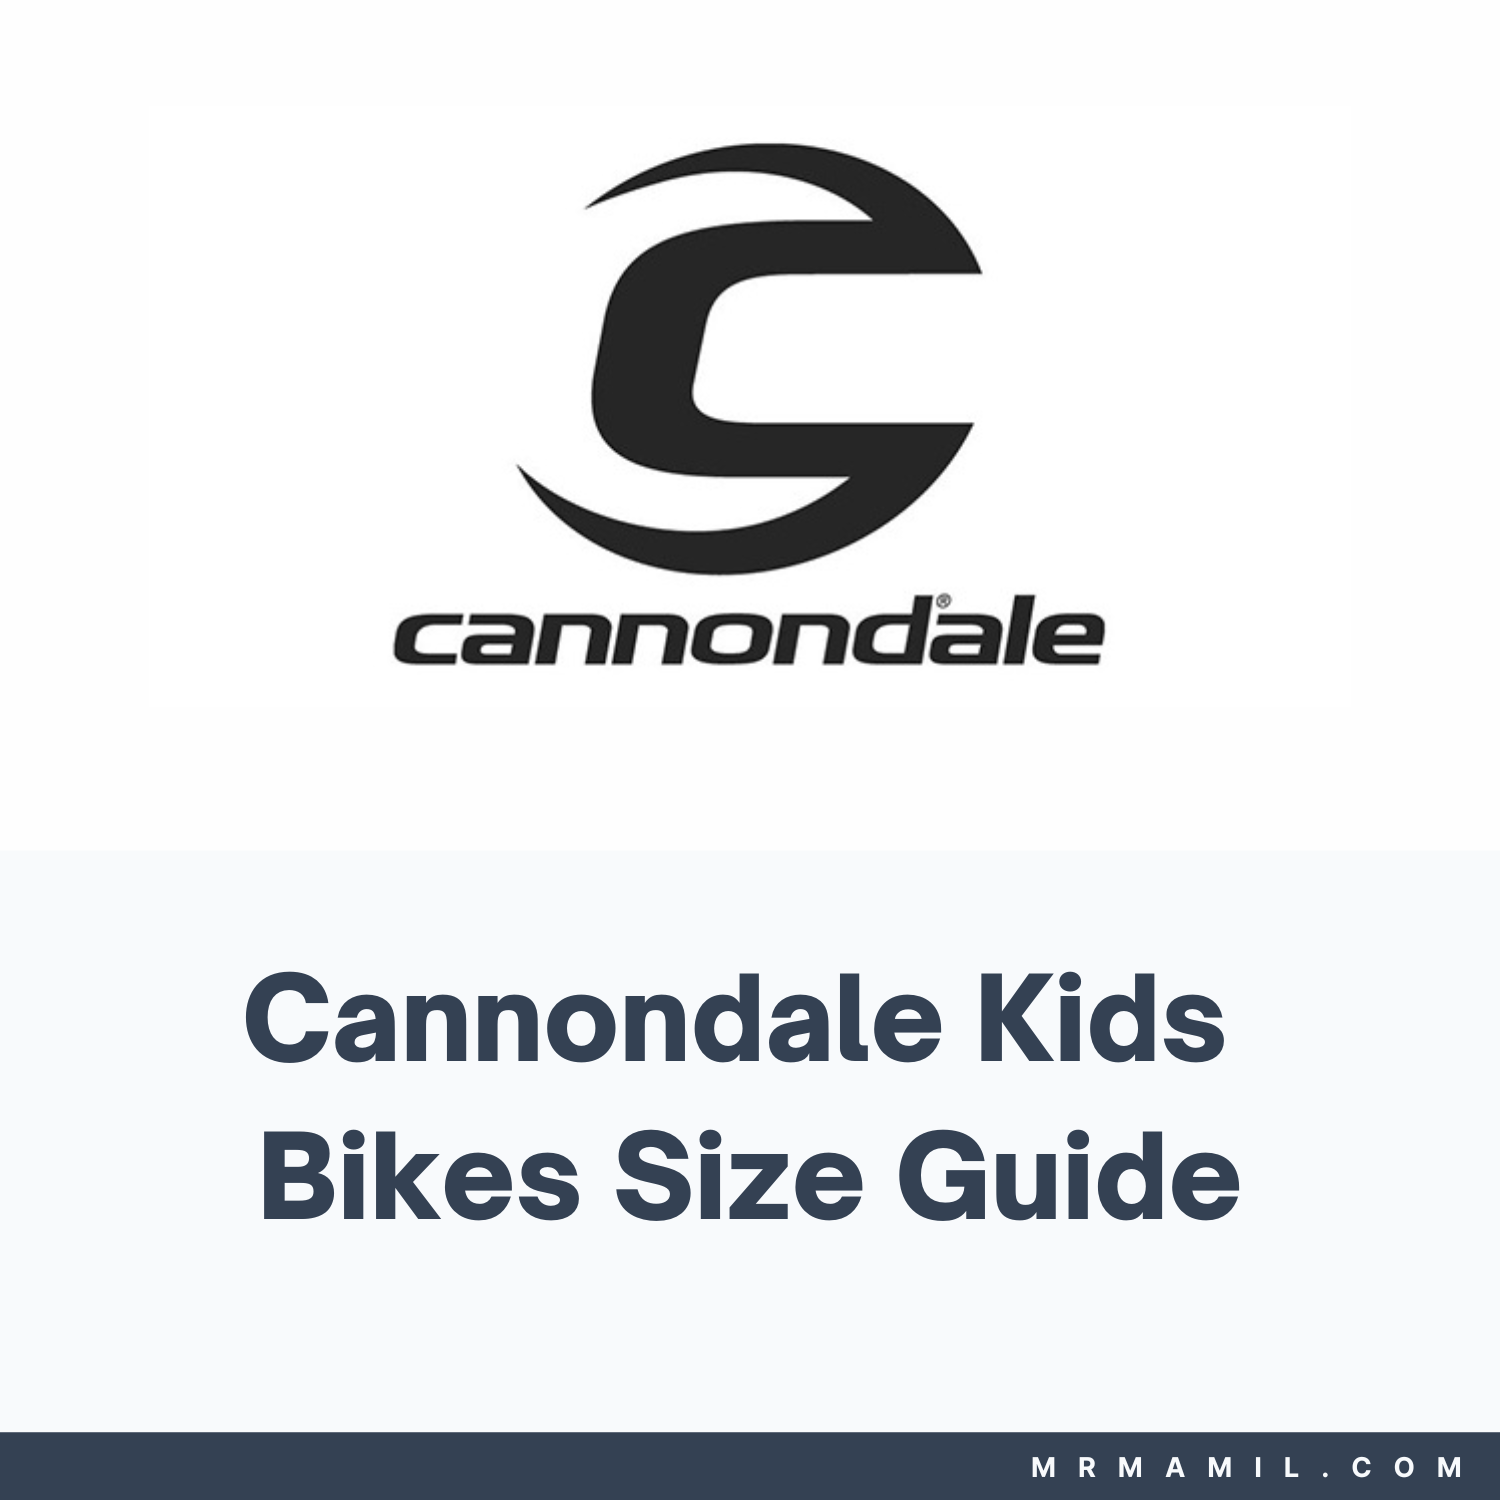 Cannondale Kids Bikes Size Guide